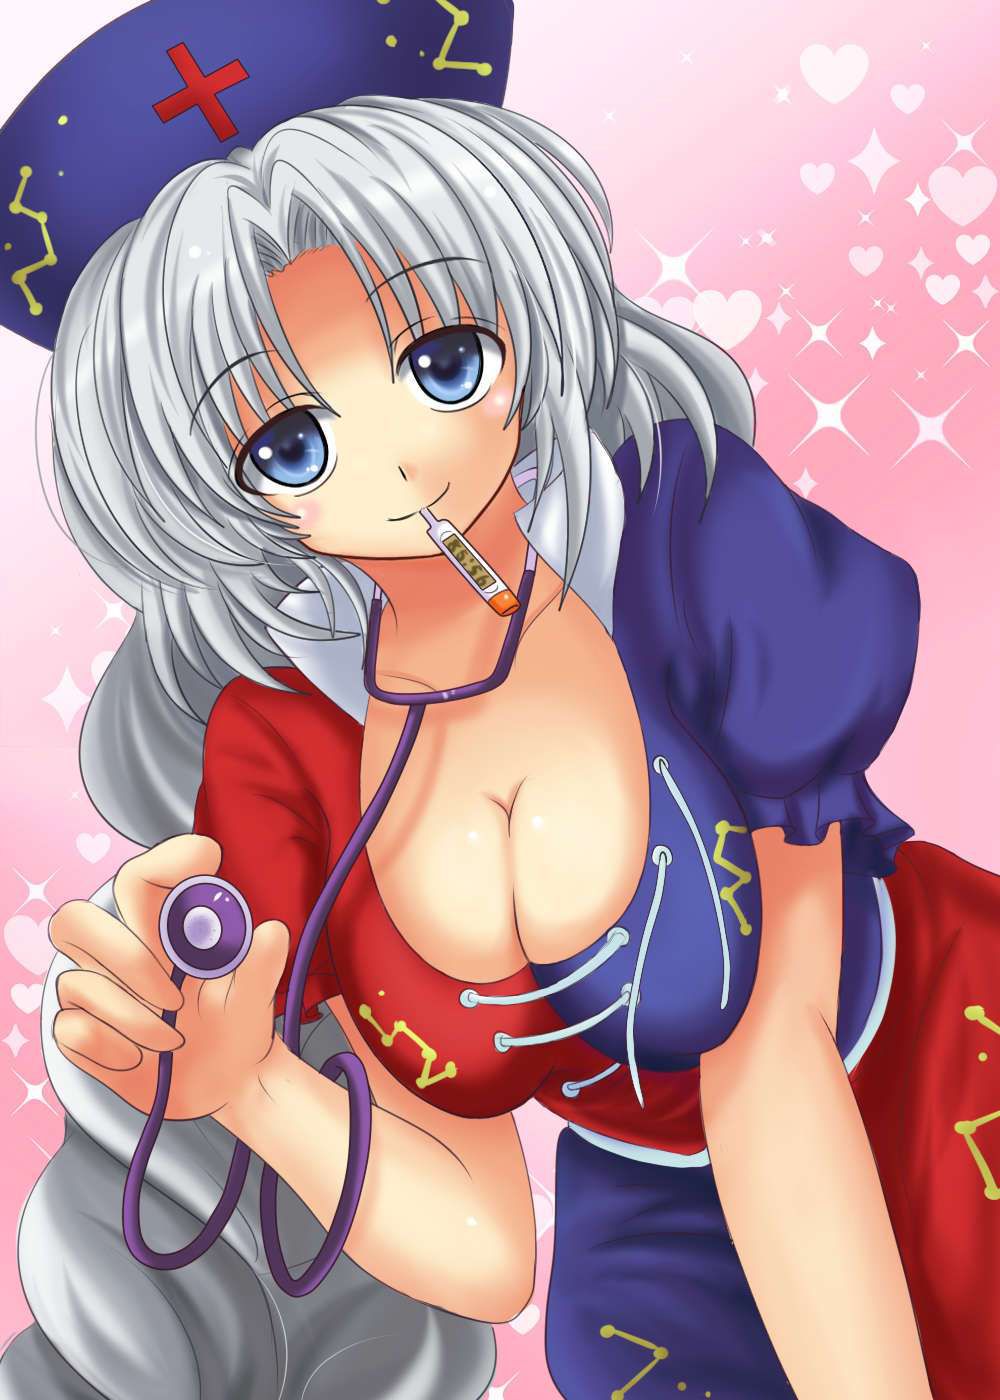 [66 pictures] touhou eirin 8 any erotic pictures! Part 2 10